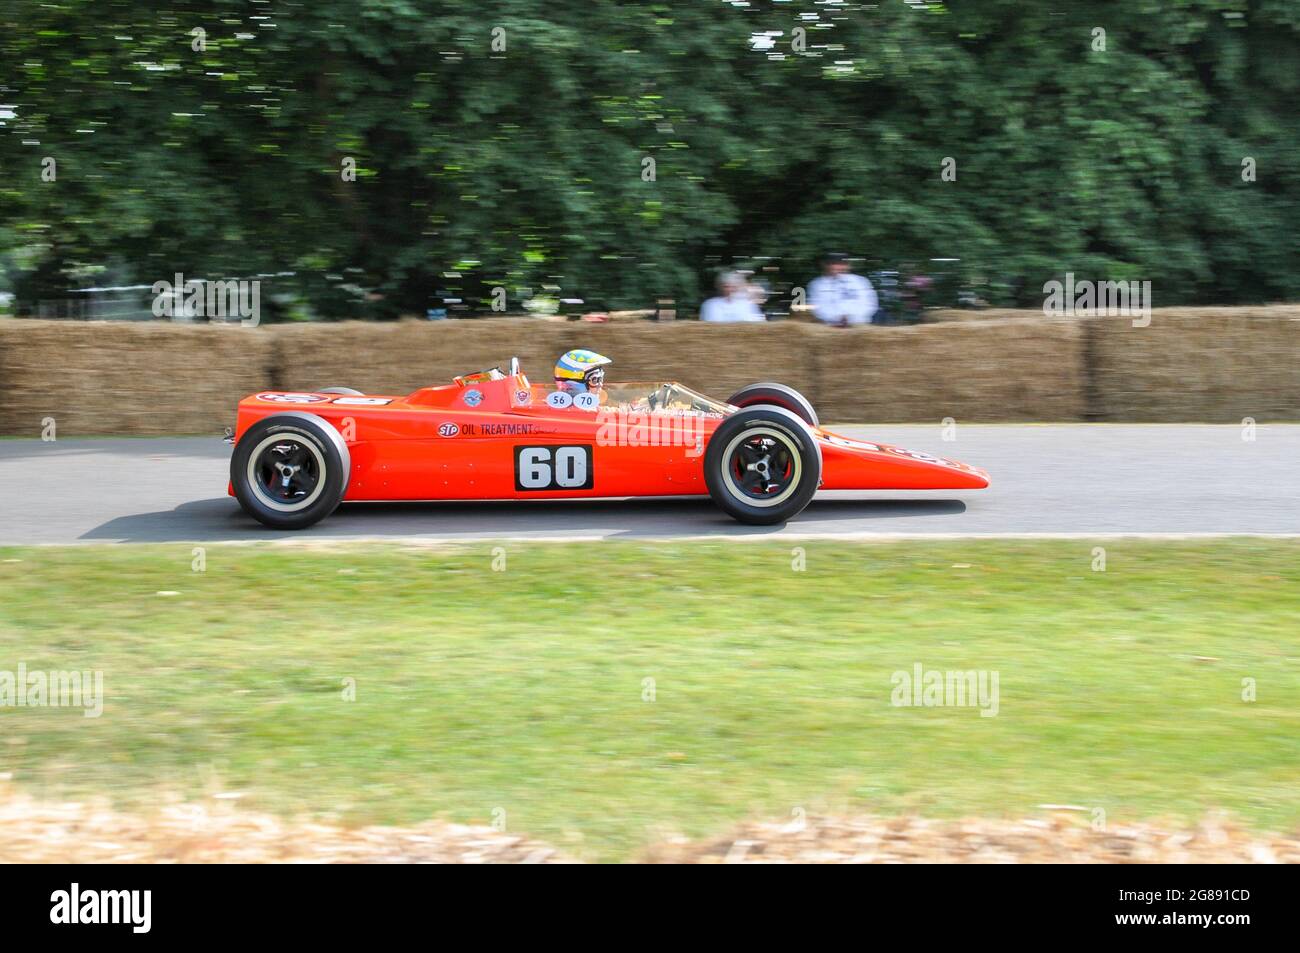 Lotus 56 gas turbine-powered four-wheel-driven racing car at the Goodwood Festival of Speed 2013. STP-backed entry in the Indianapolis 500. 4WD car Stock Photo